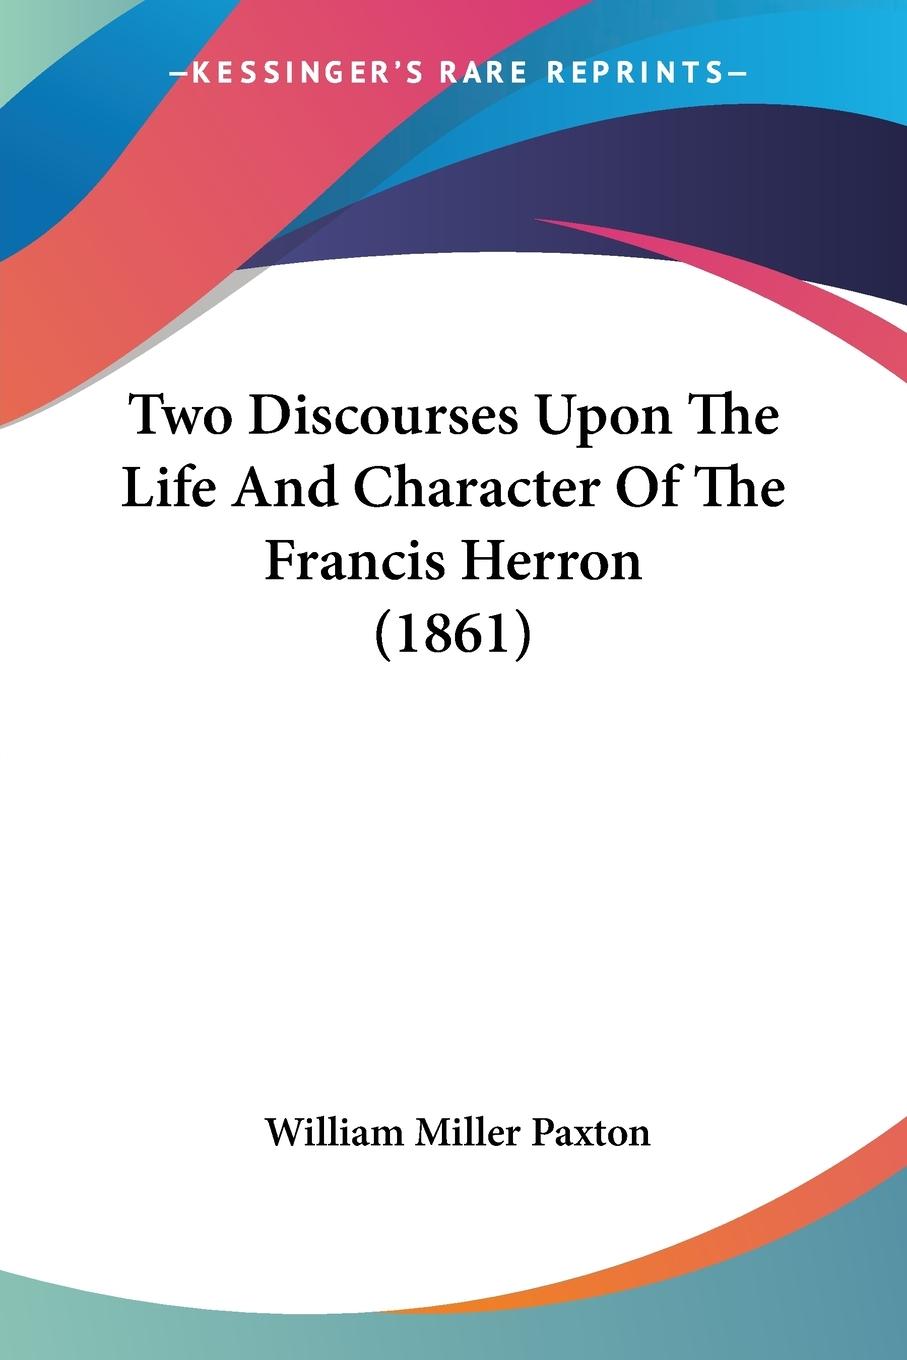 Two Discourses Upon The Life And Character Of The Francis Herron (1861) - Paxton, William Miller